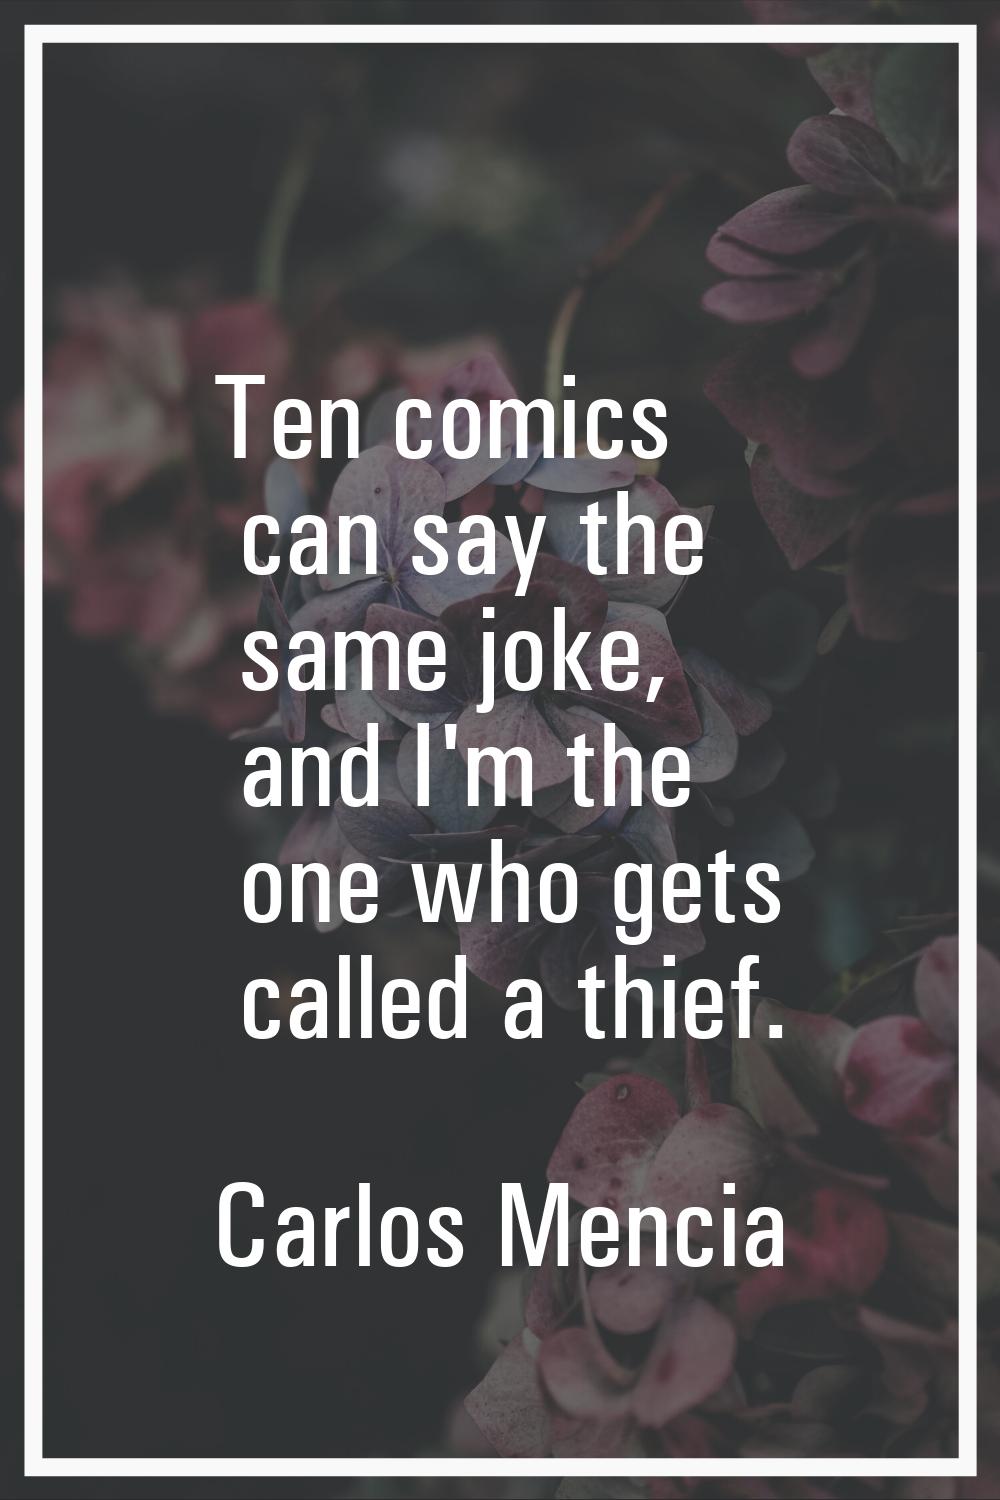 Ten comics can say the same joke, and I'm the one who gets called a thief.